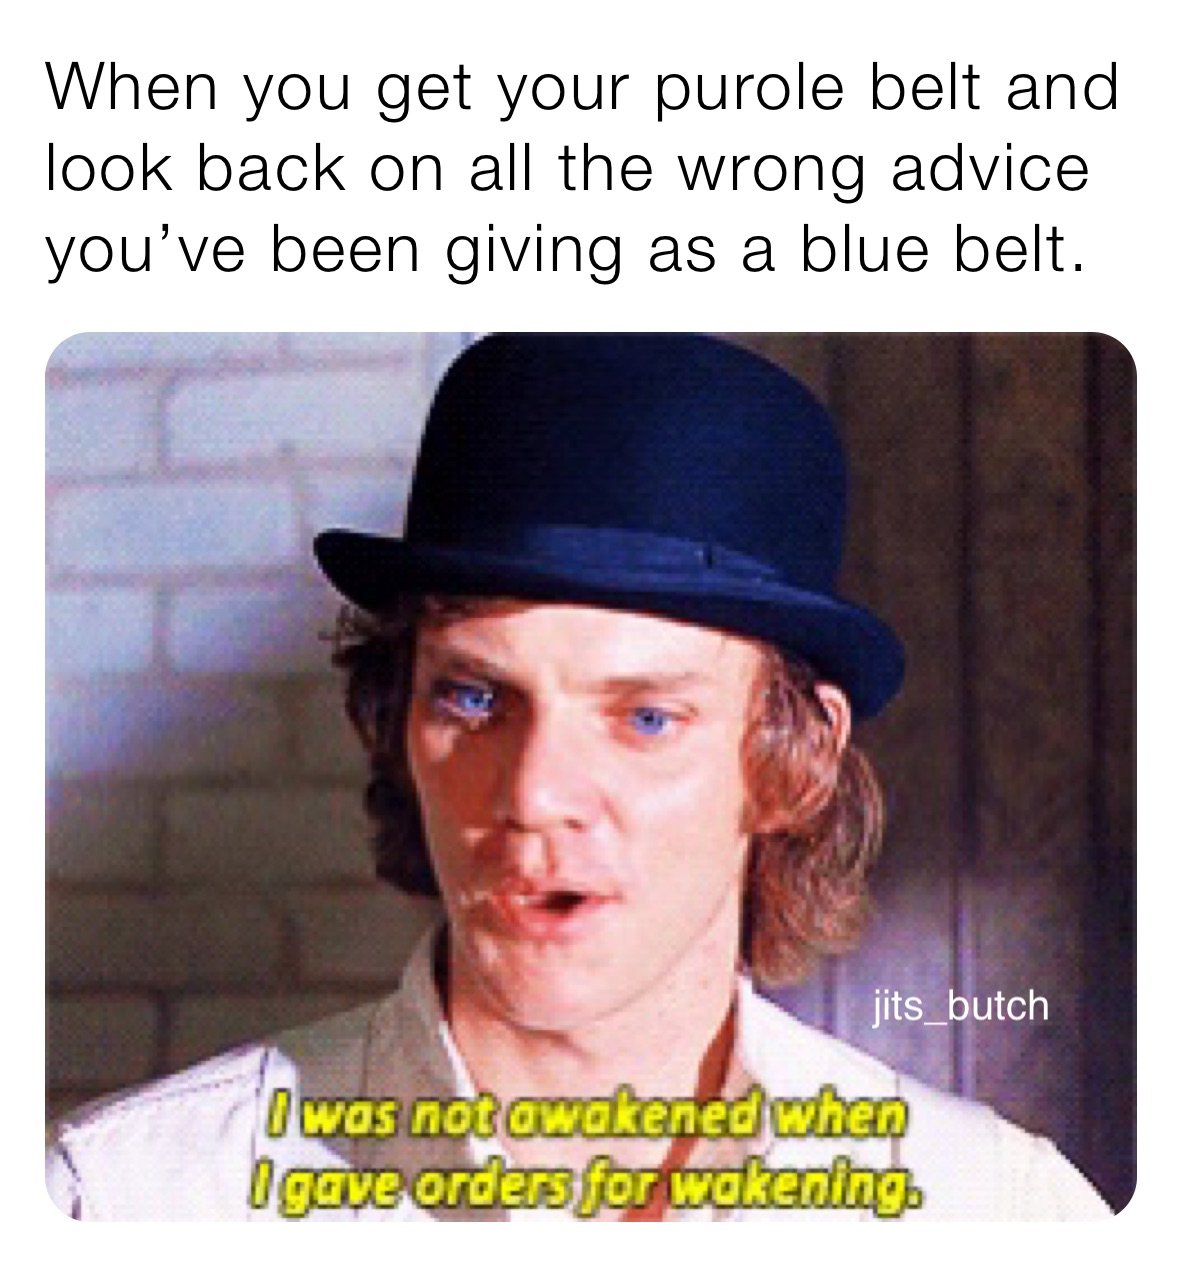 When you get your purole belt and look back on all the wrong advice you’ve been giving as a blue belt.